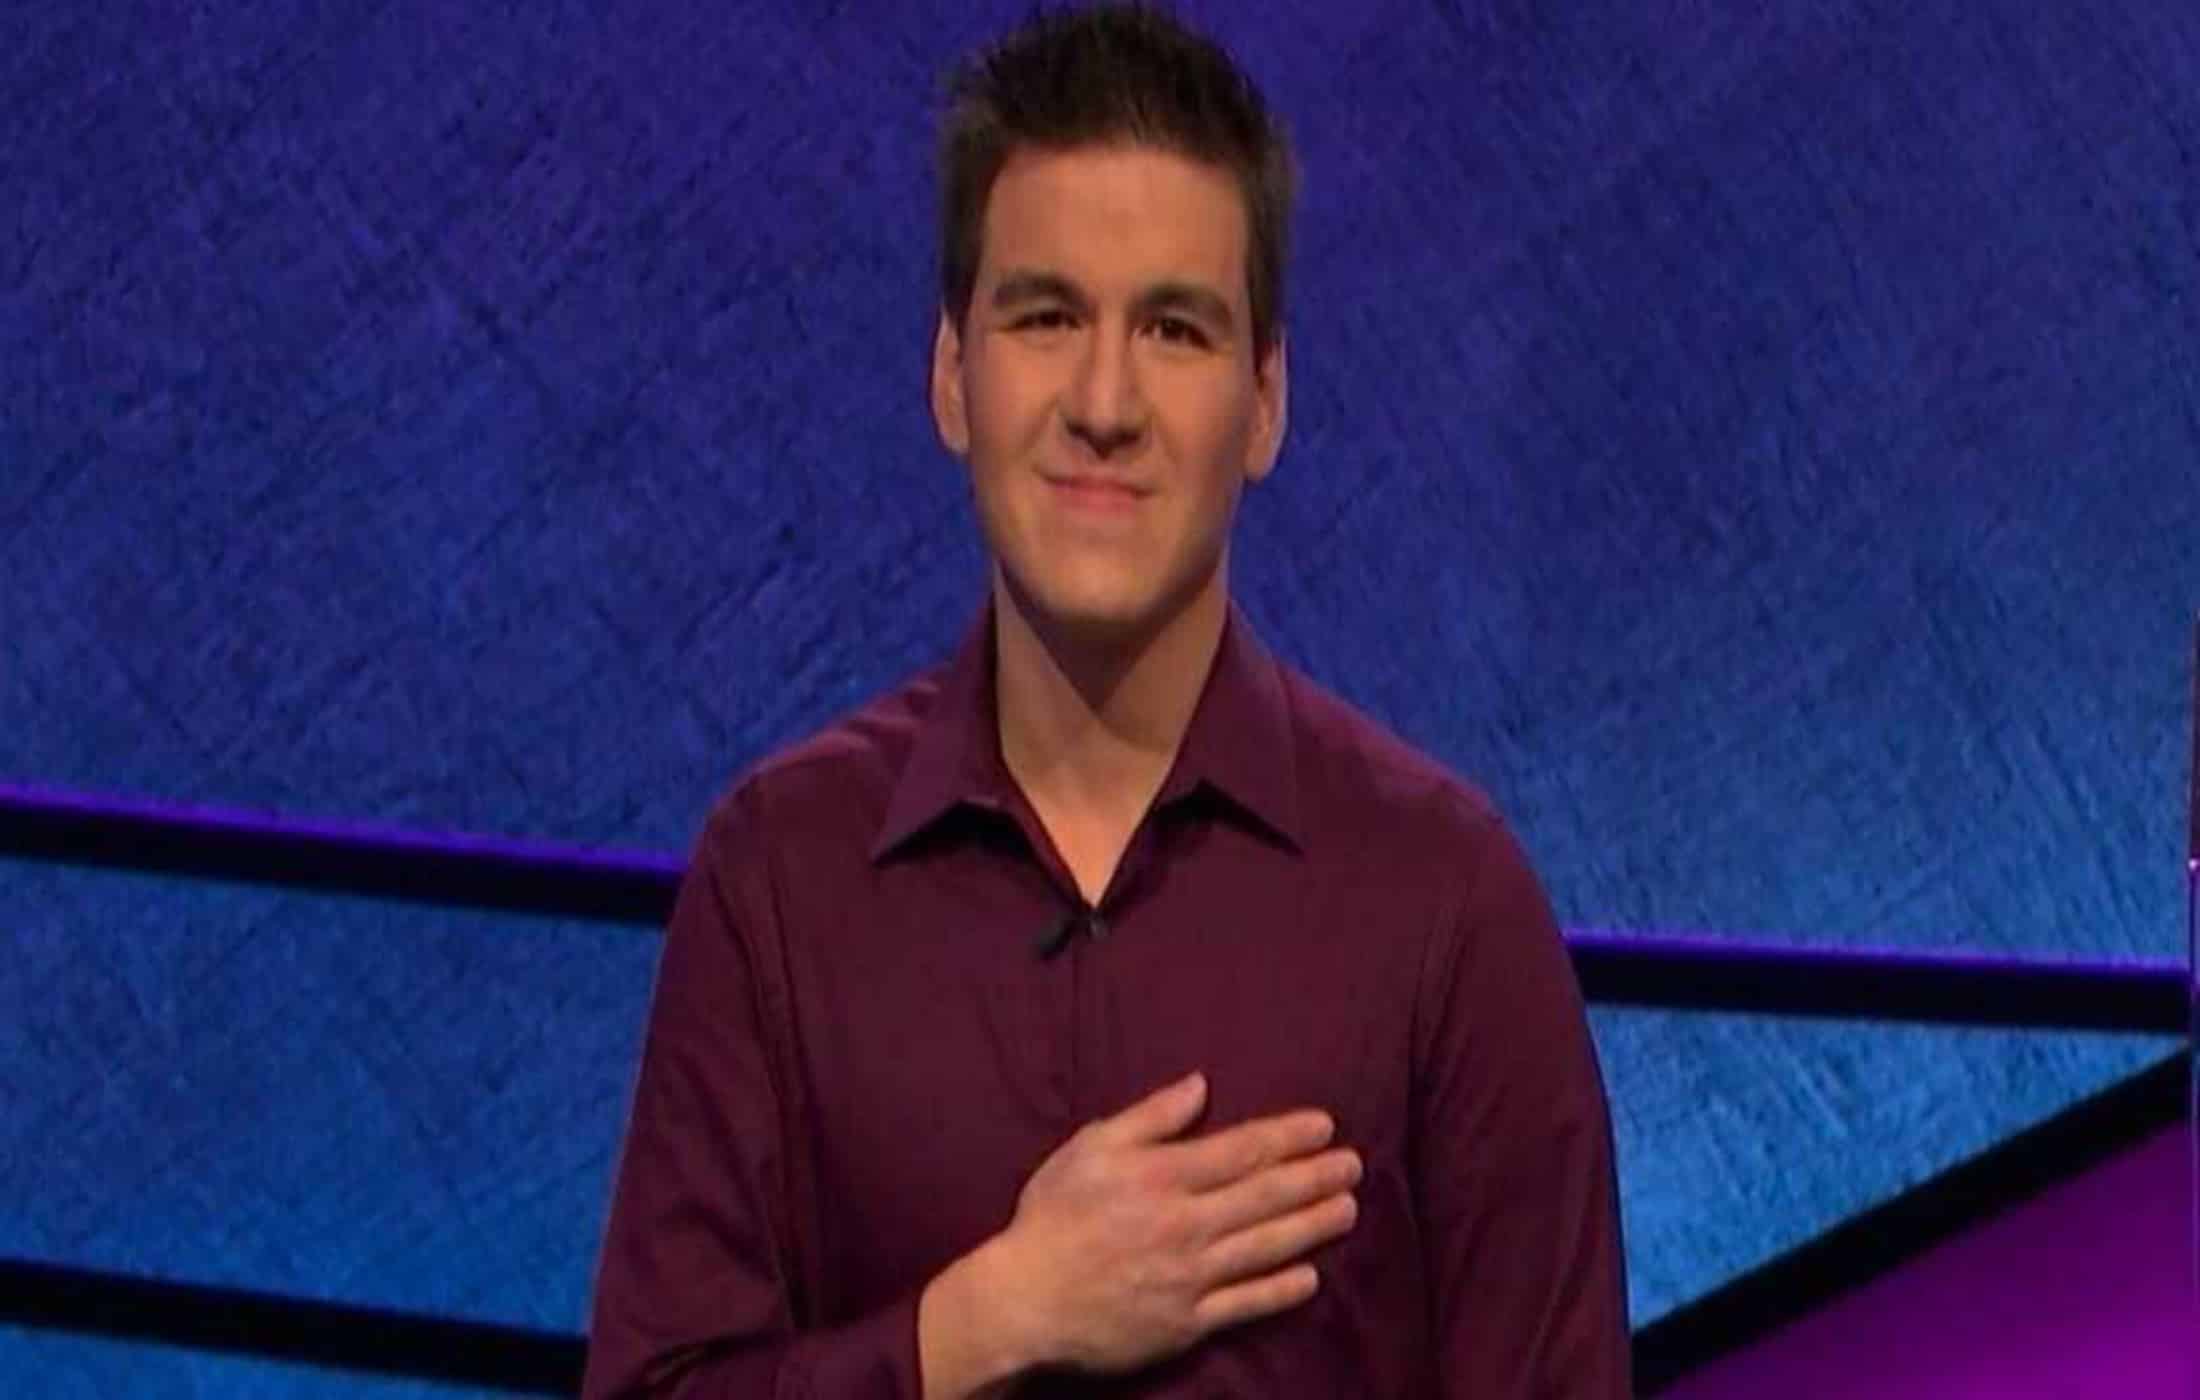 James Holzhauer net worth, age, wiki, family, biography and latest